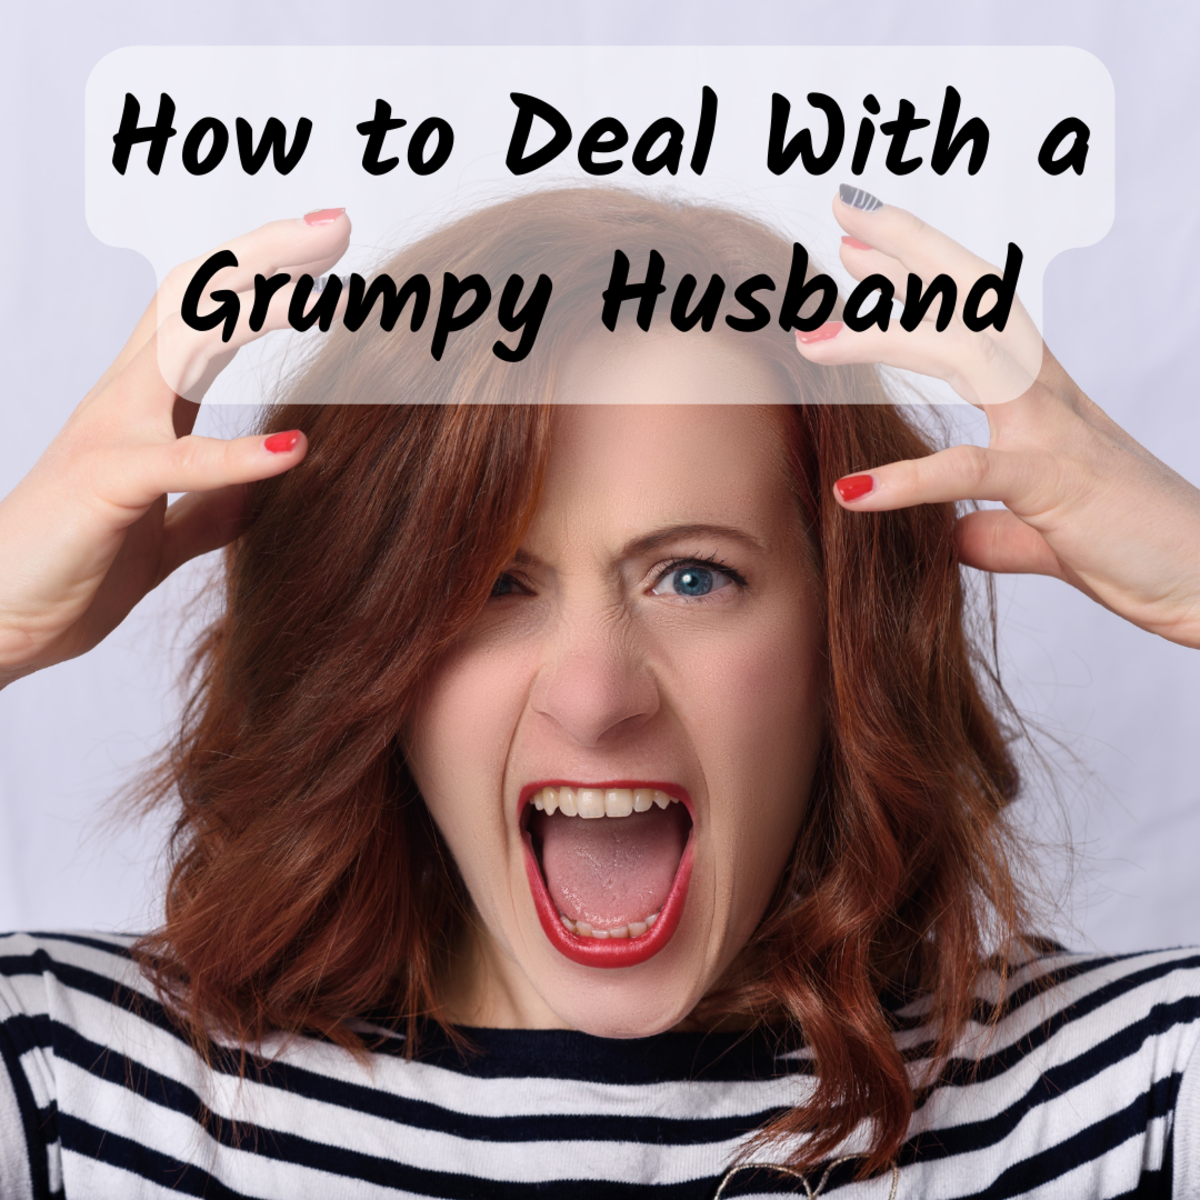 This article provides helpful tips on how to deal with a super crabby, grumpy husband. Help yourself out and read through these quick, practical pointers.